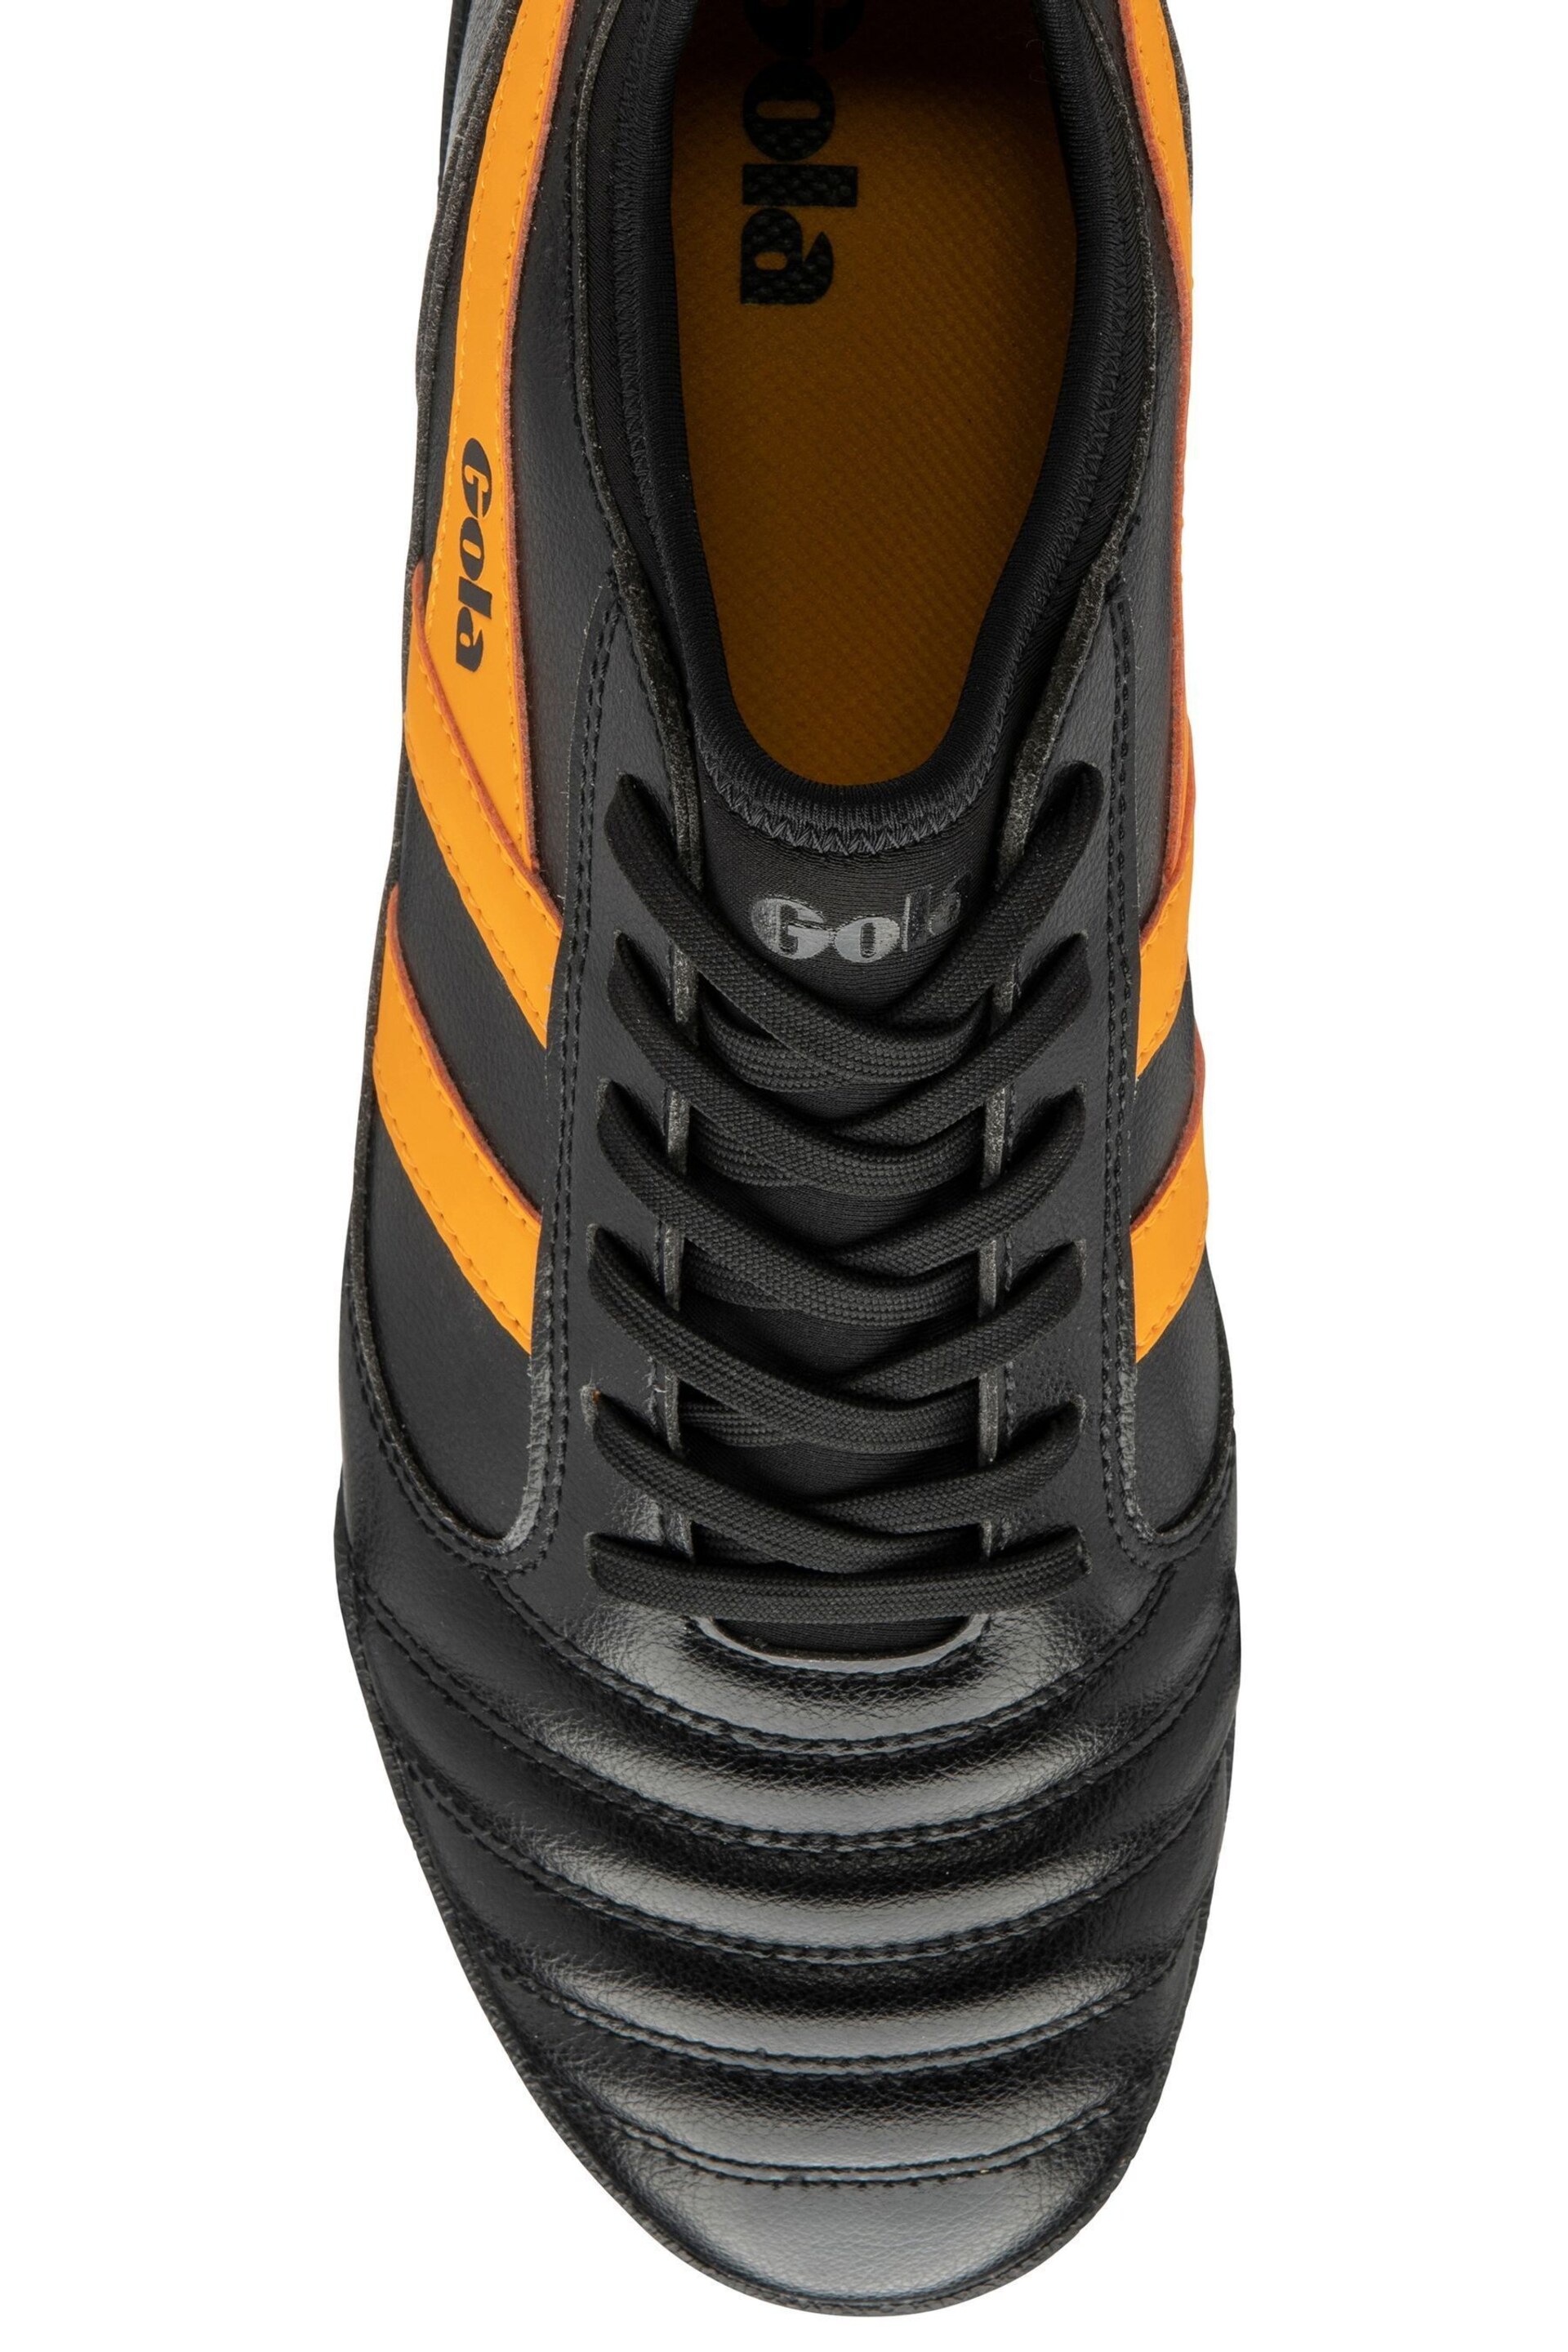 Gola Black Juniors Ceptor Turf Microfibre Lace-Up Football Boots - Image 4 of 5